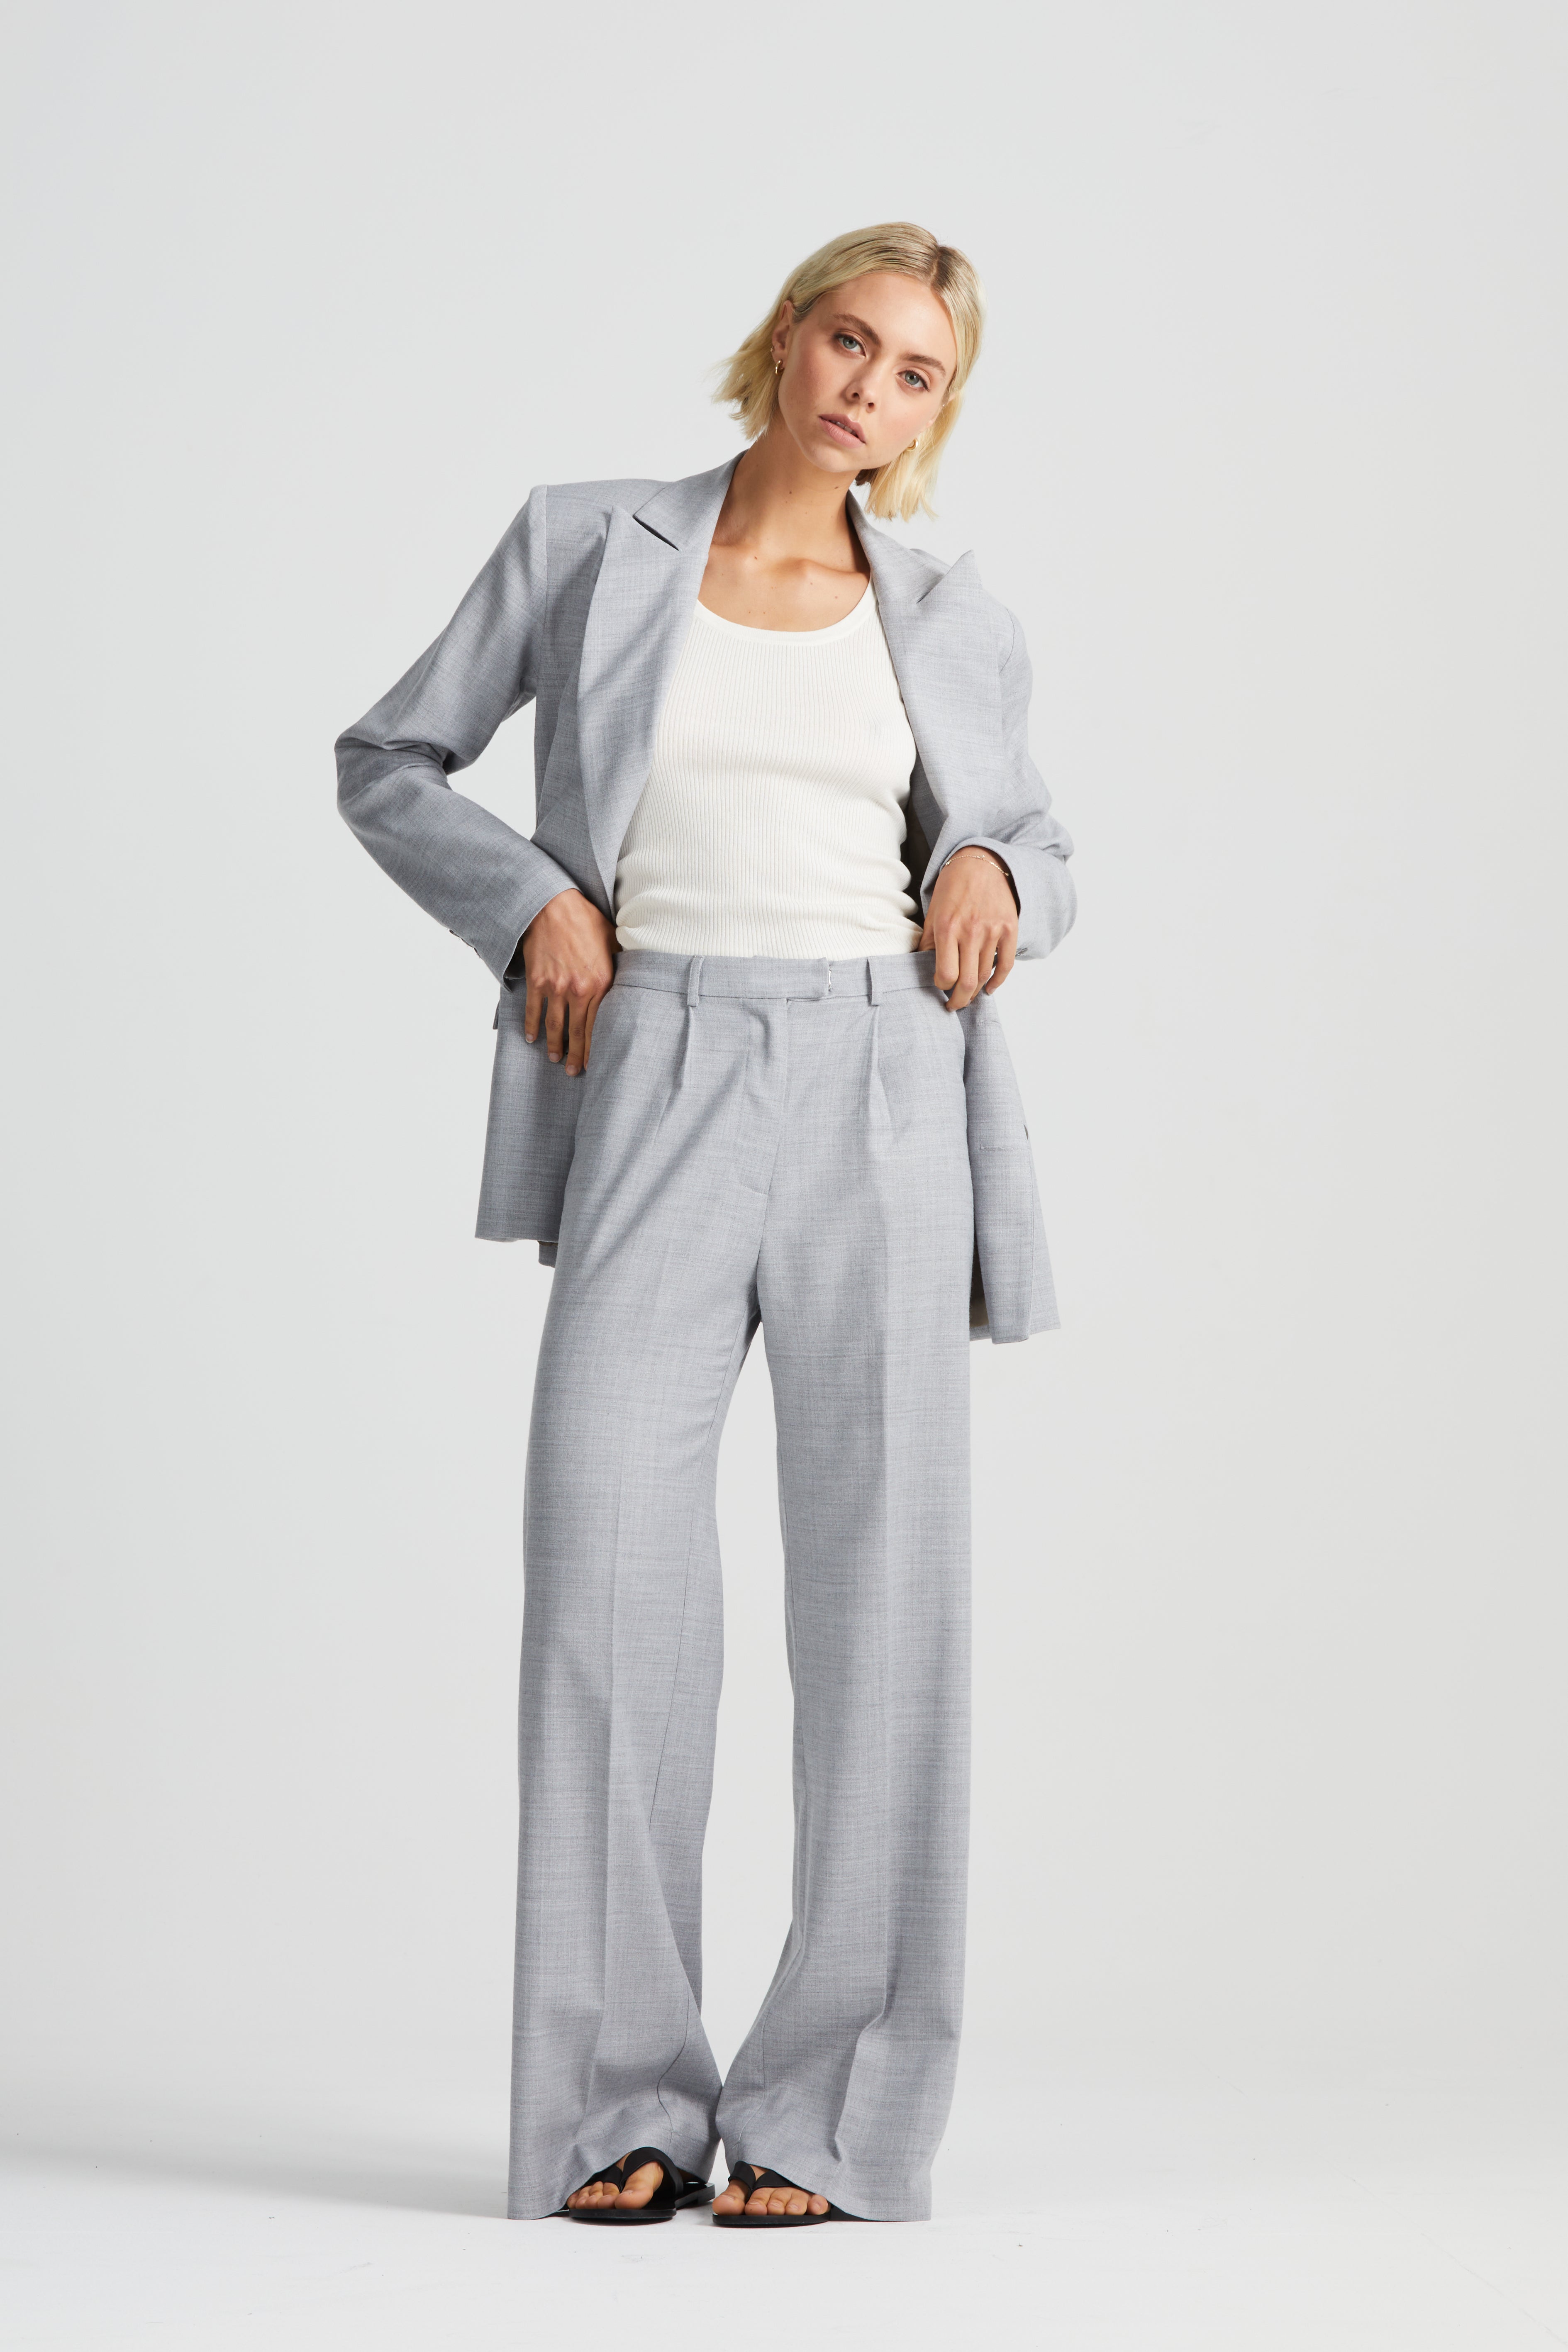 The Signature Relaxed Double-Breasted Blazer | Grey Wool Crepe $780